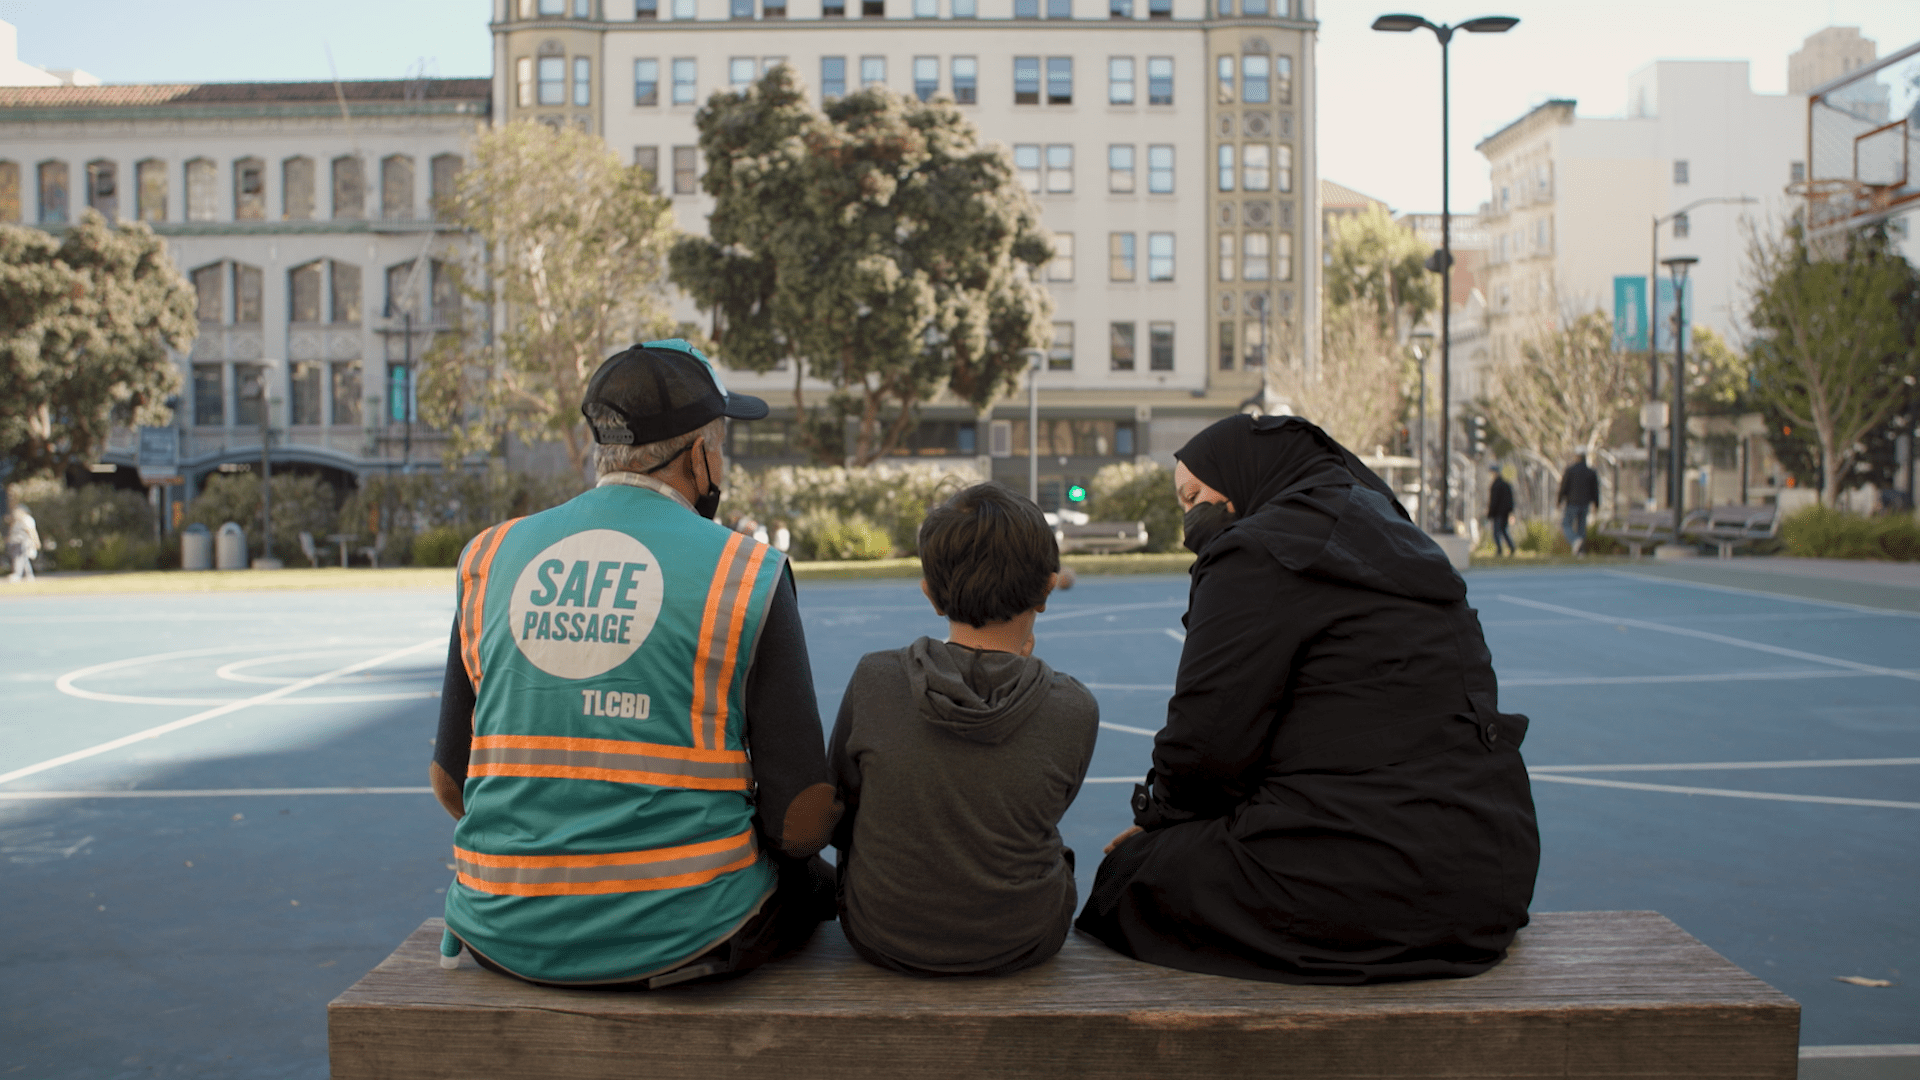 ‘This Shouldn’t Be Normal’: Tenderloin Parents Grapple with Neighborhood Woes